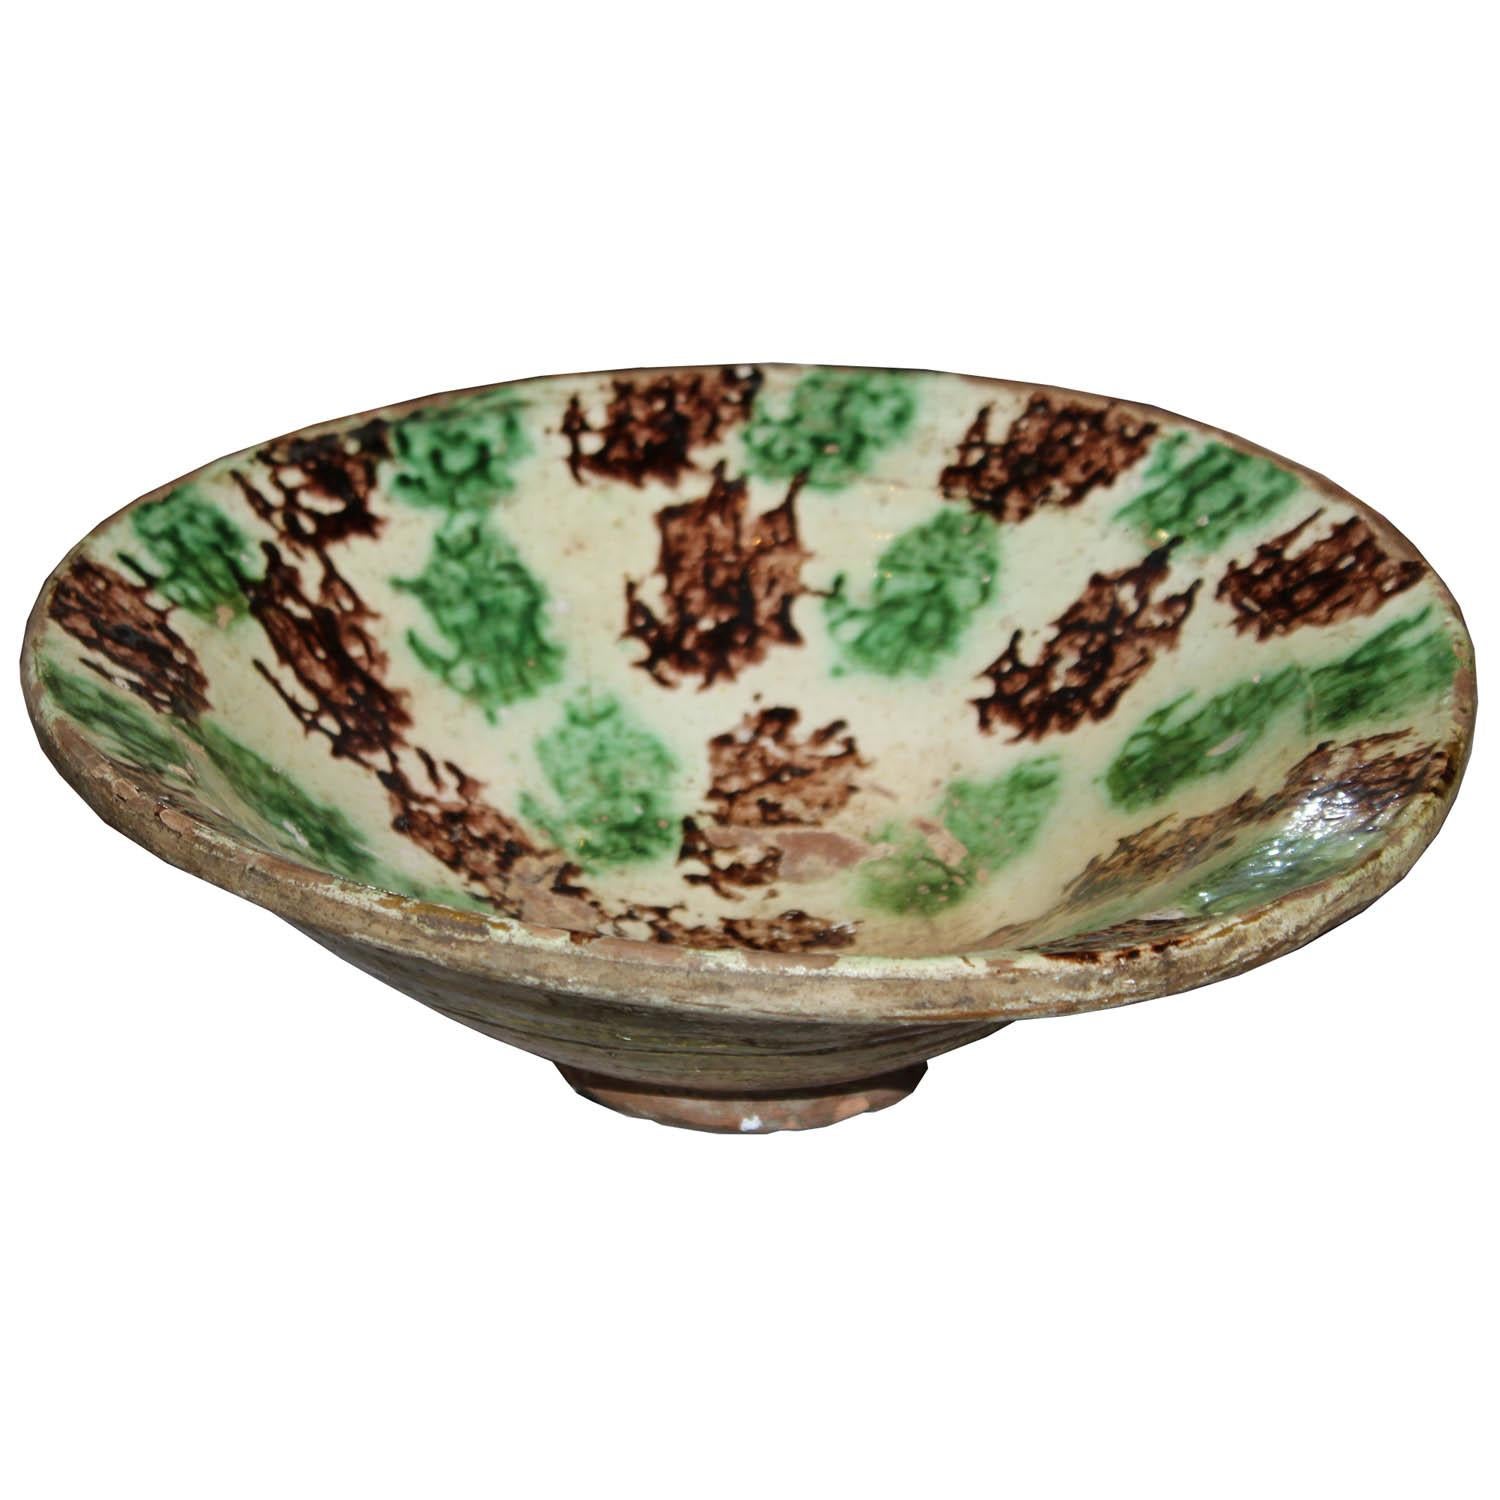 Vintage green and brown glazed ceramic bowl originally used for food would be a nice accessory on a coffee table or on a bookshelf.
 
   